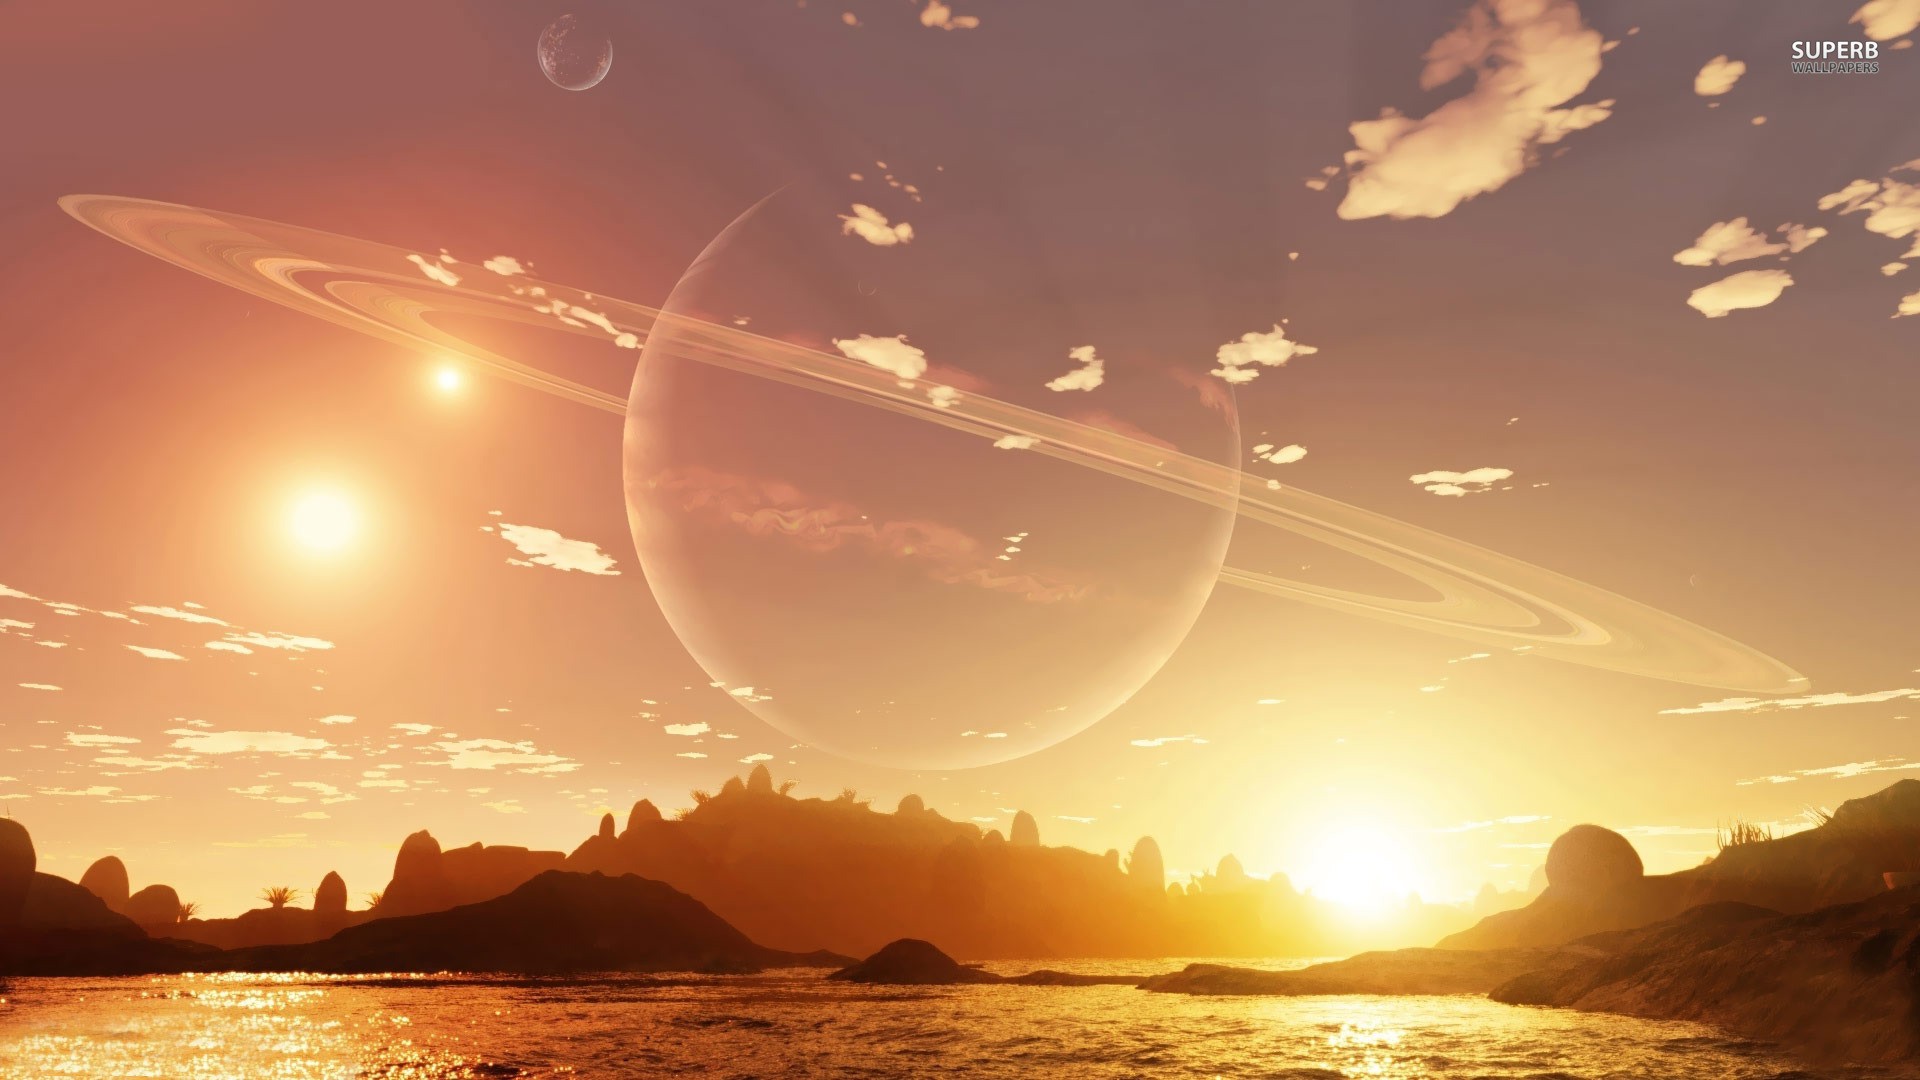 Widescreen Images, Hd Photos, Amazing, Wallpaper, Desktop - Planets In Sky Day - HD Wallpaper 